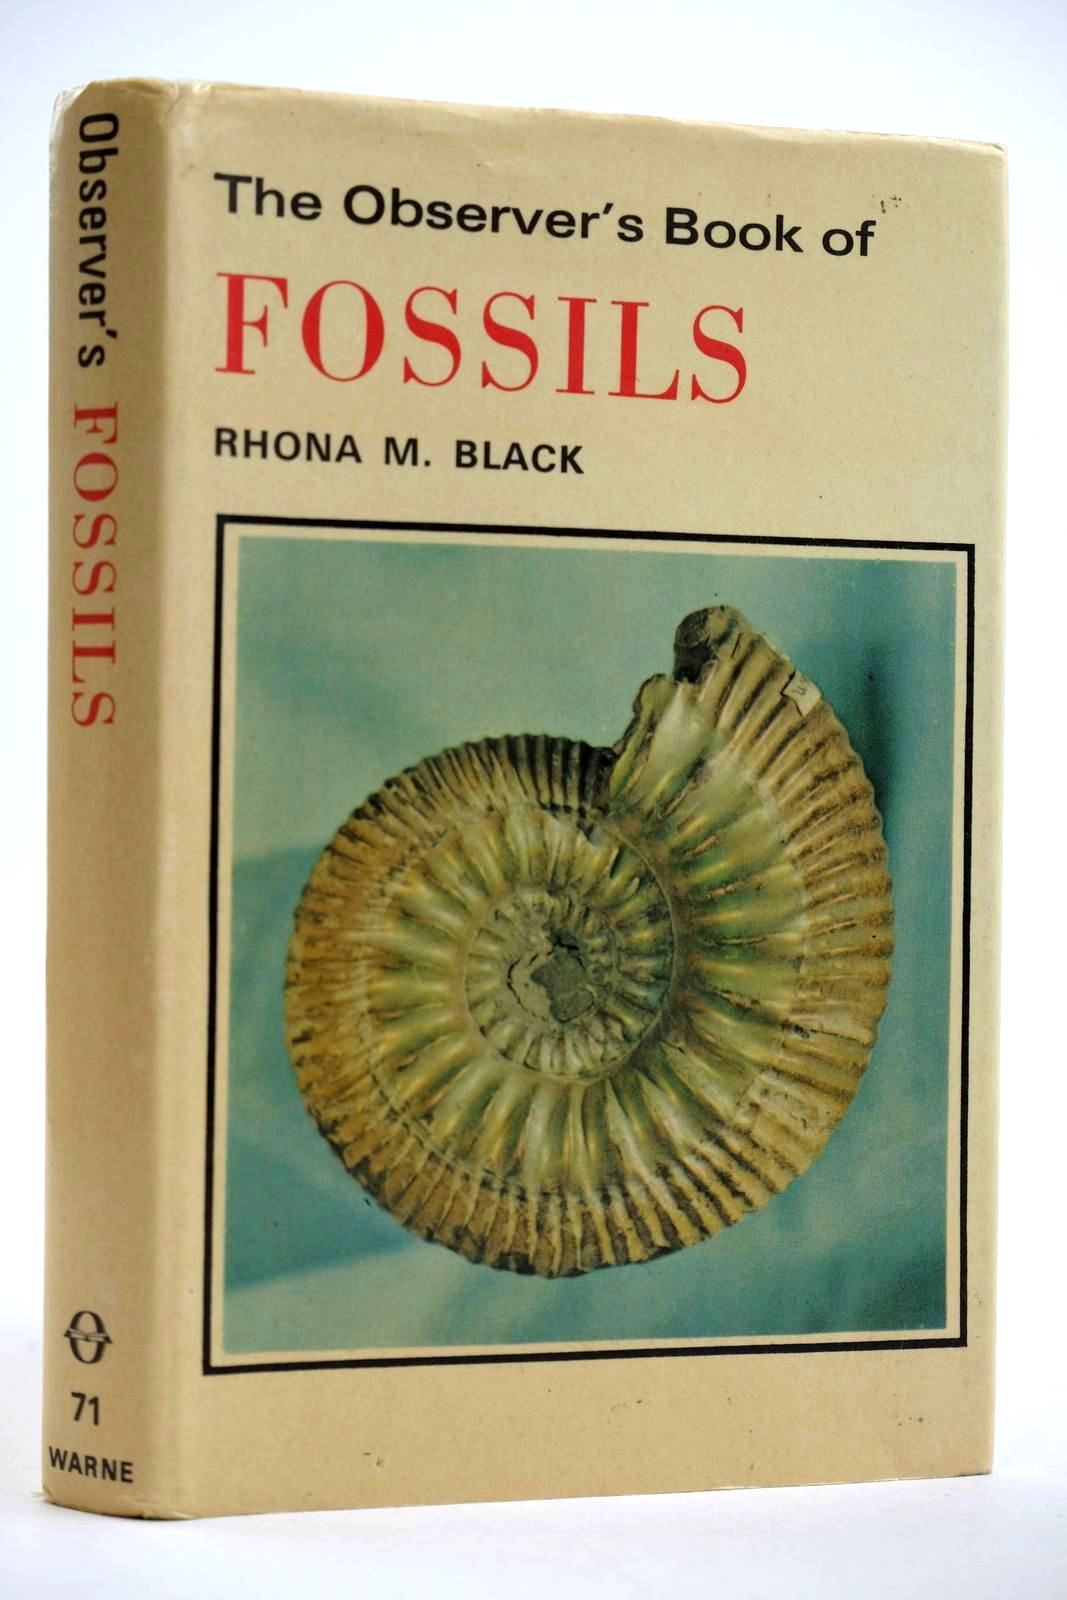 Photo of THE OBSERVER'S BOOK OF FOSSILS written by Black, Rhona M. illustrated by Black, Rhona M. published by Frederick Warne & Co Ltd. (STOCK CODE: 2132051)  for sale by Stella & Rose's Books